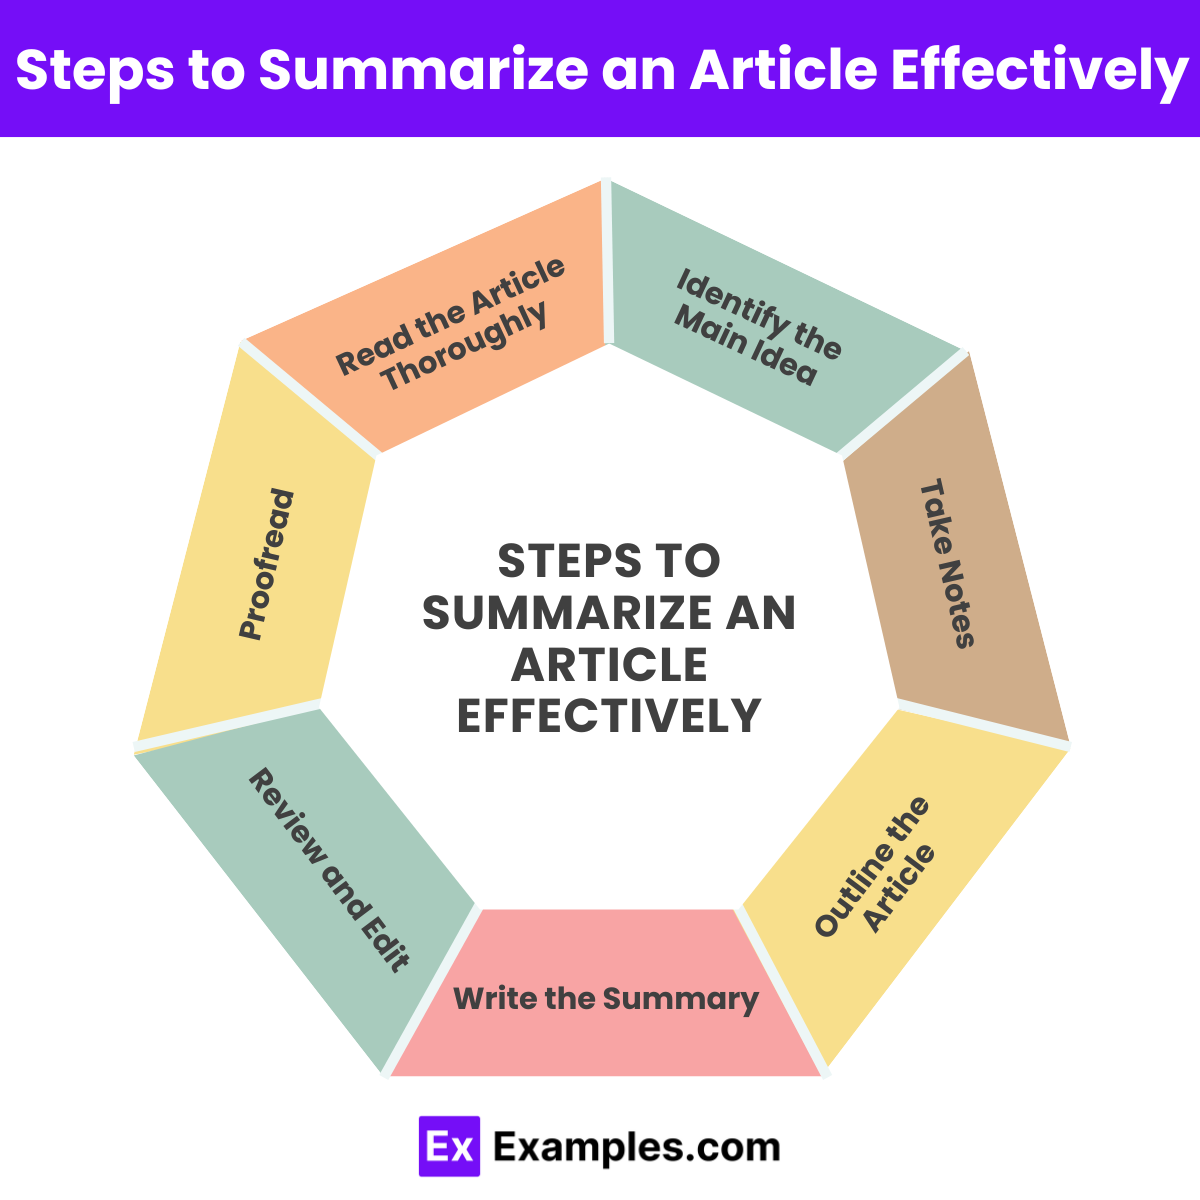 Steps to Summarize an Article Effectively